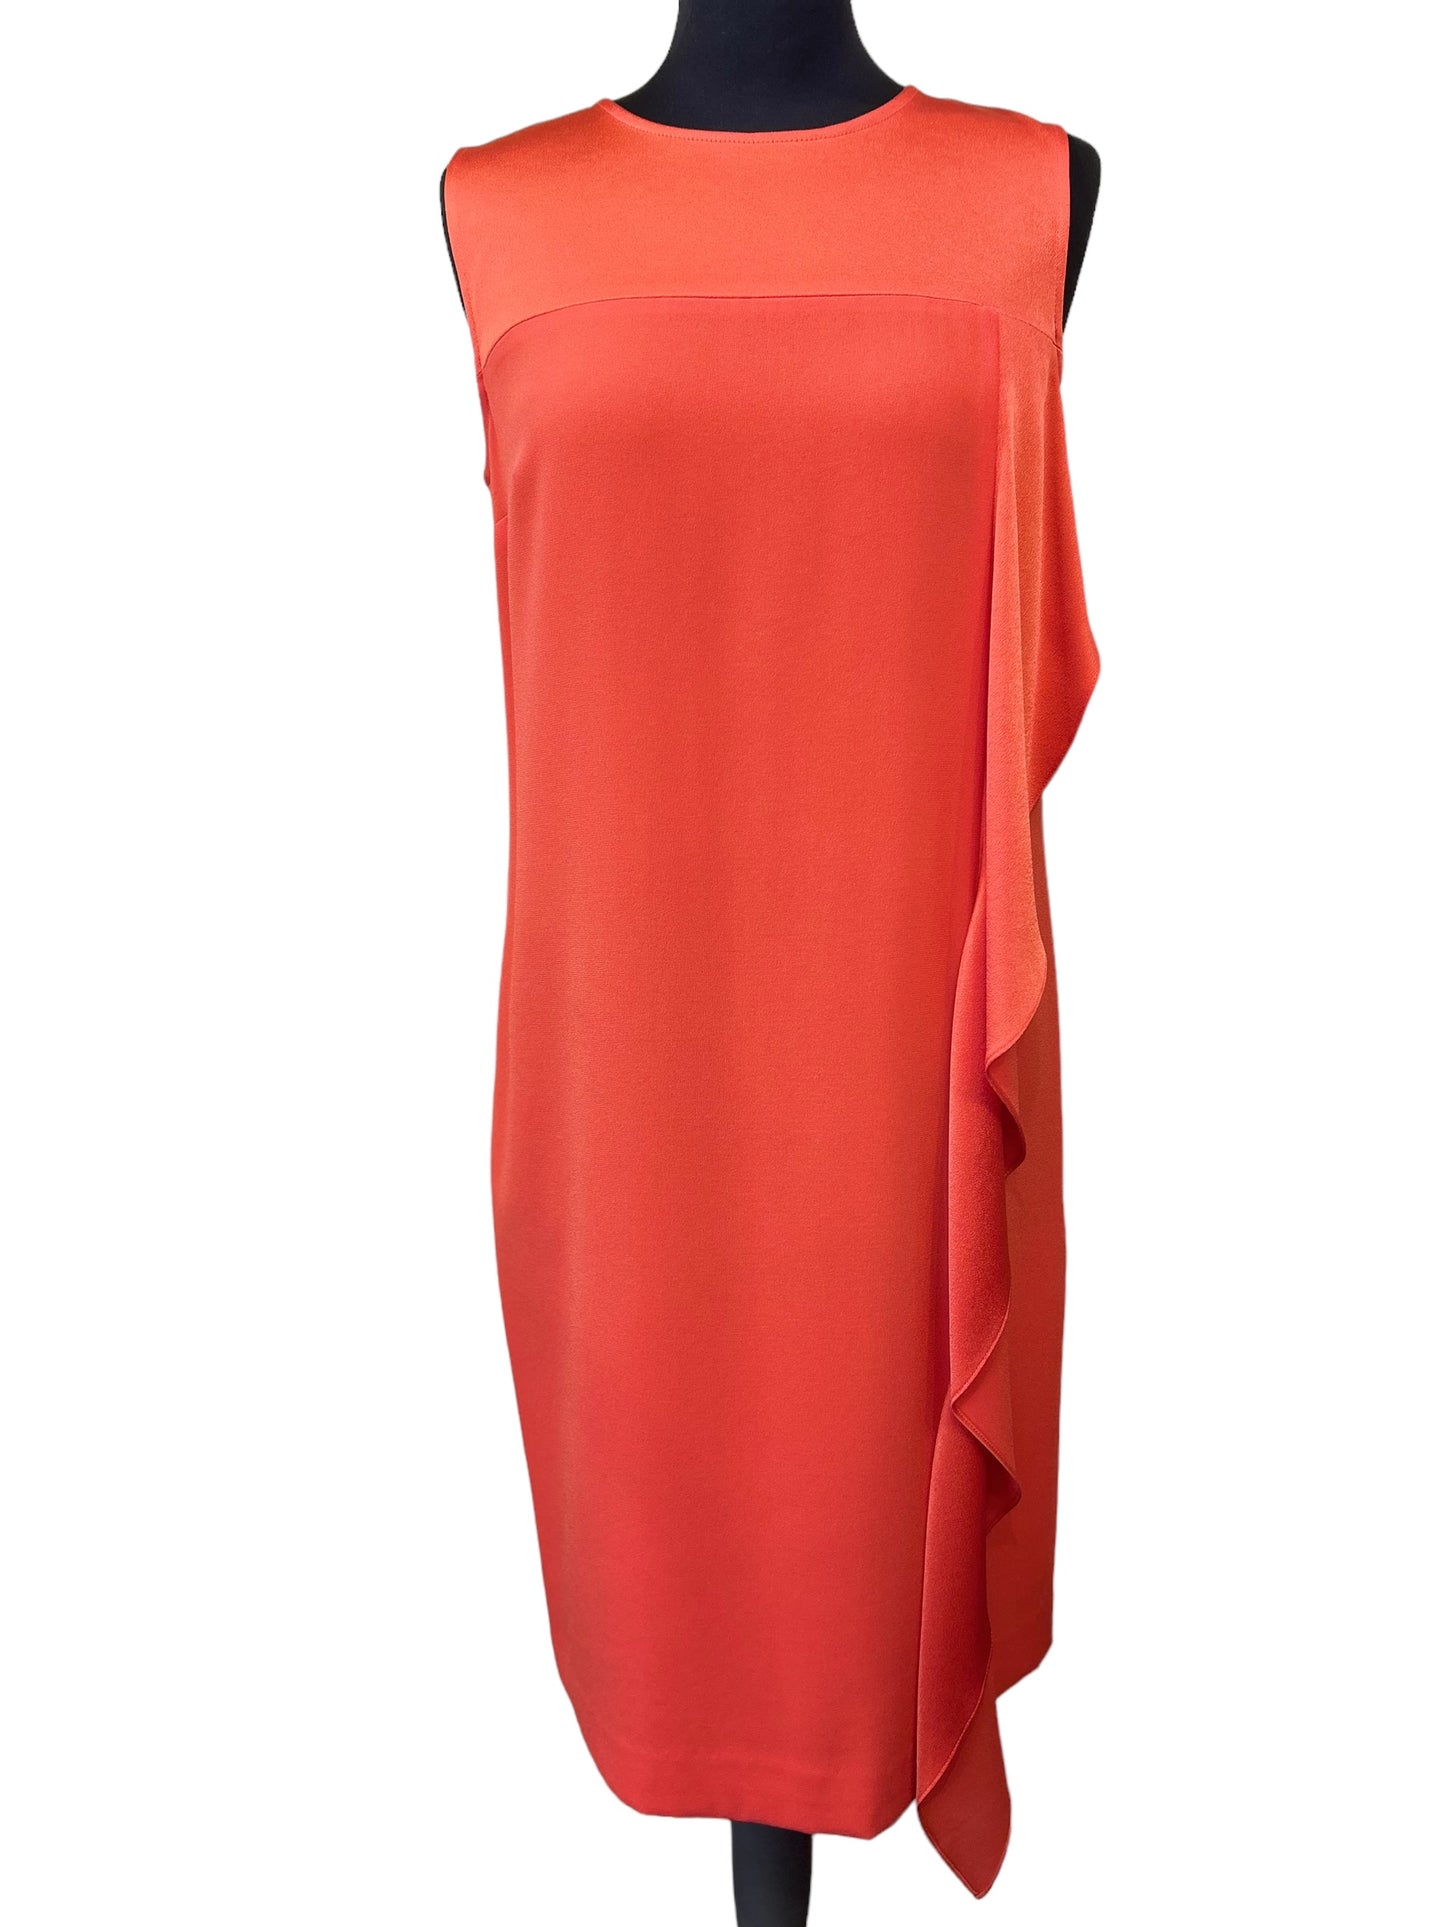 DKNY coral dress size Small